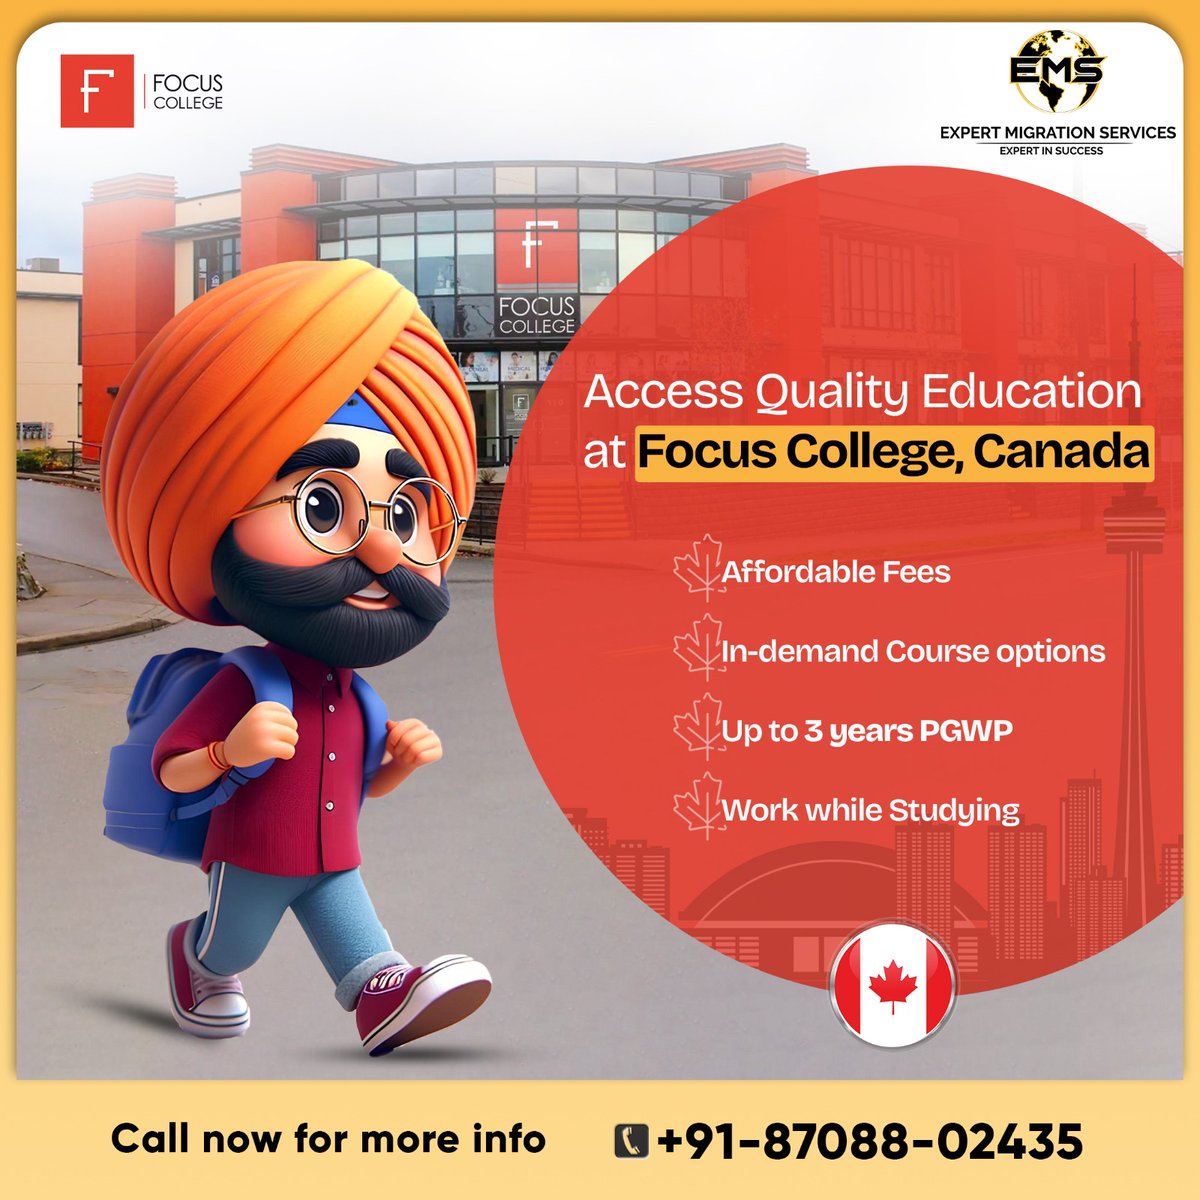 🇨🇦 Invest in yourself! 🇨🇦 
Pursue your academic goals at the prestigious Focus College, Canada. 
Contact us for admission!⤵

#ExpertMigrationServices #CanadaImmigration #StudyInCanada #StudyVisa #TopCanadianColleges
 #FocusCollege